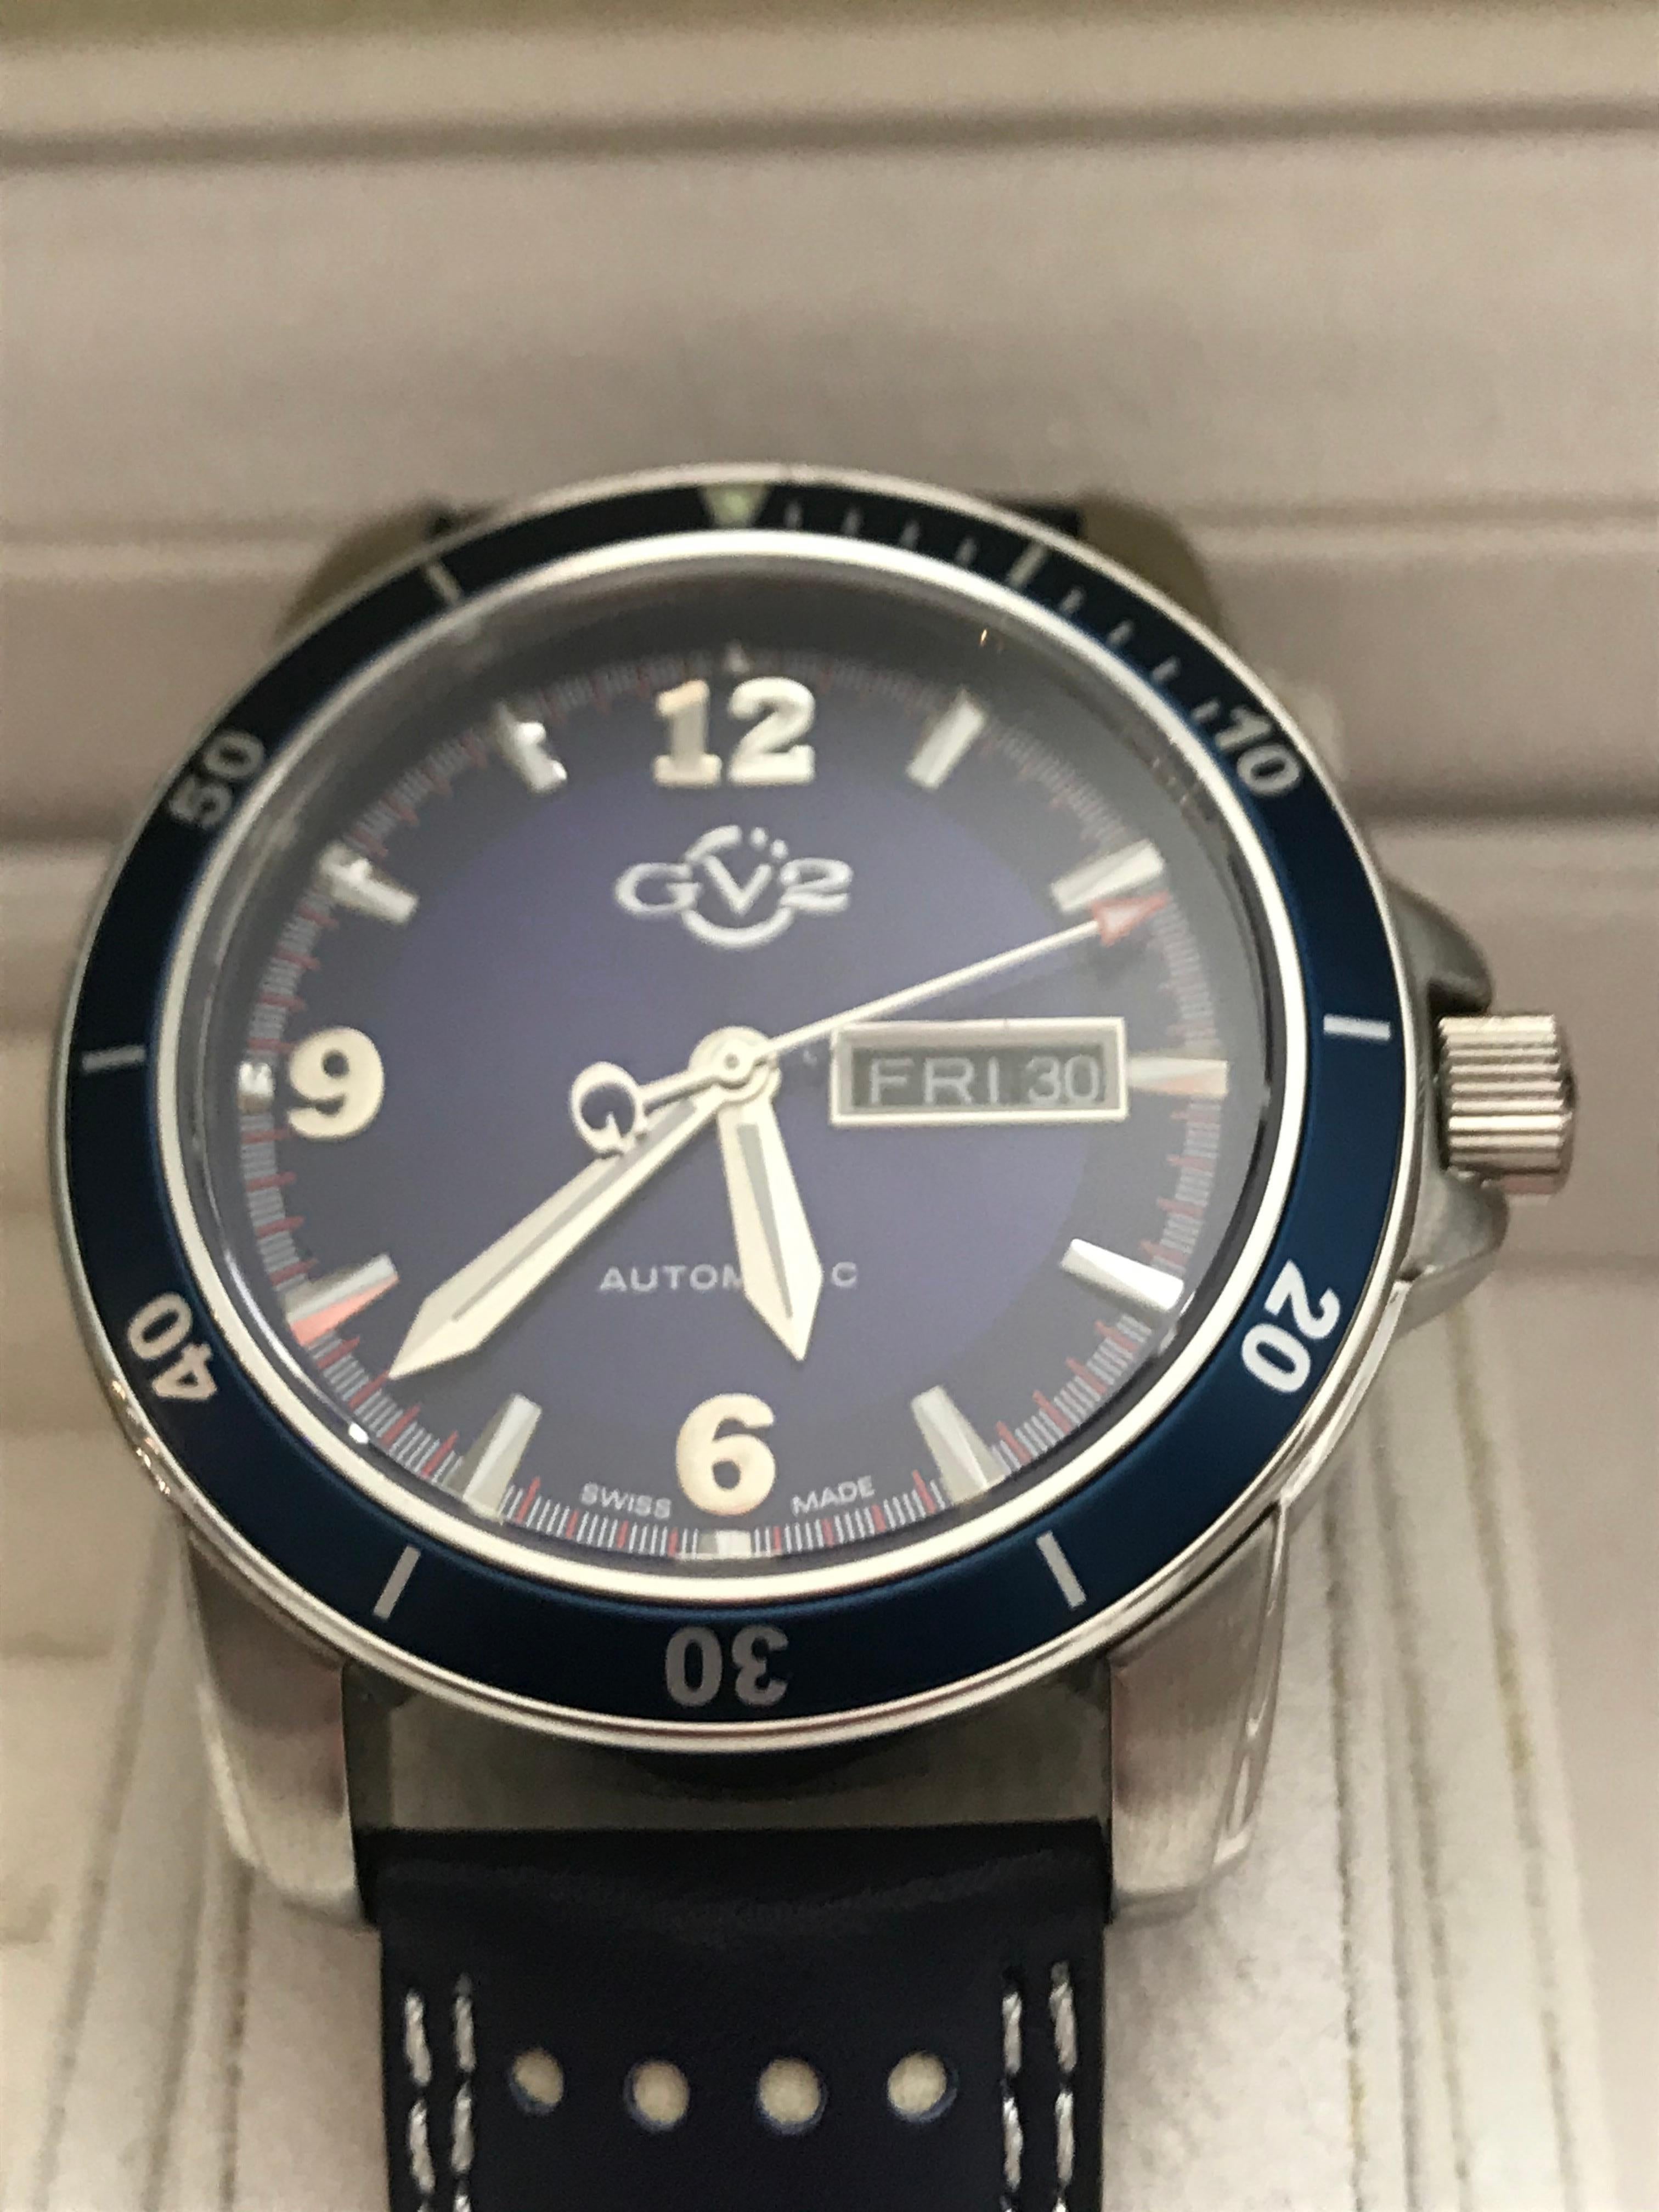 Gevril
Submariner ref 4802
Steel/ blue leather strap
Deployment buckle
Blue bezel and dial
Day and date
Automatic
Sapphire back
42mm
Waterproof 50 meters 
Limited Edition 500 copies 
Swiss made
New from stock
Circa 2009
Box/paper/overbox
990 euros 